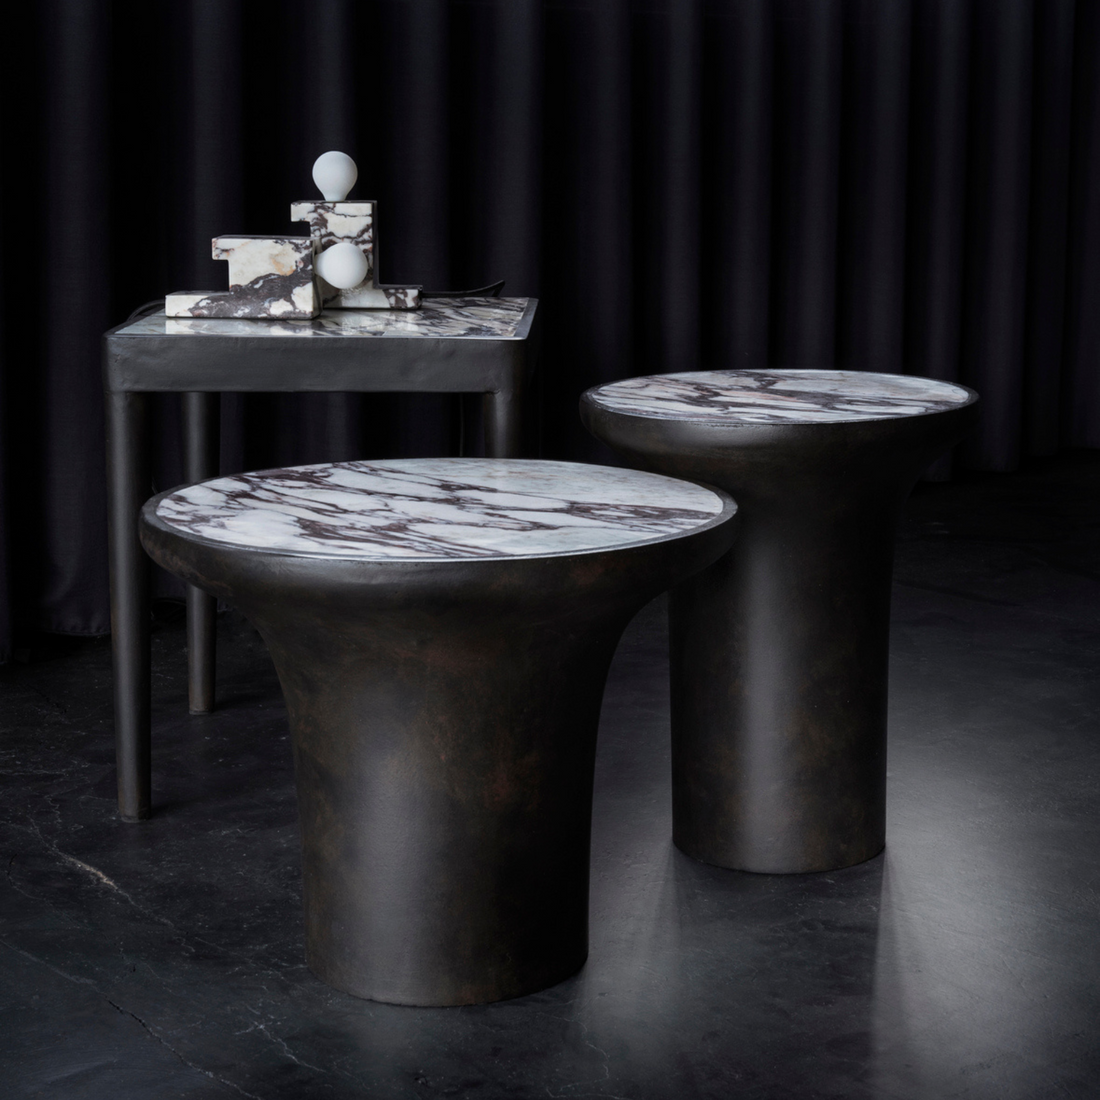 Tairu | Side Table with Calacatta Stone Top